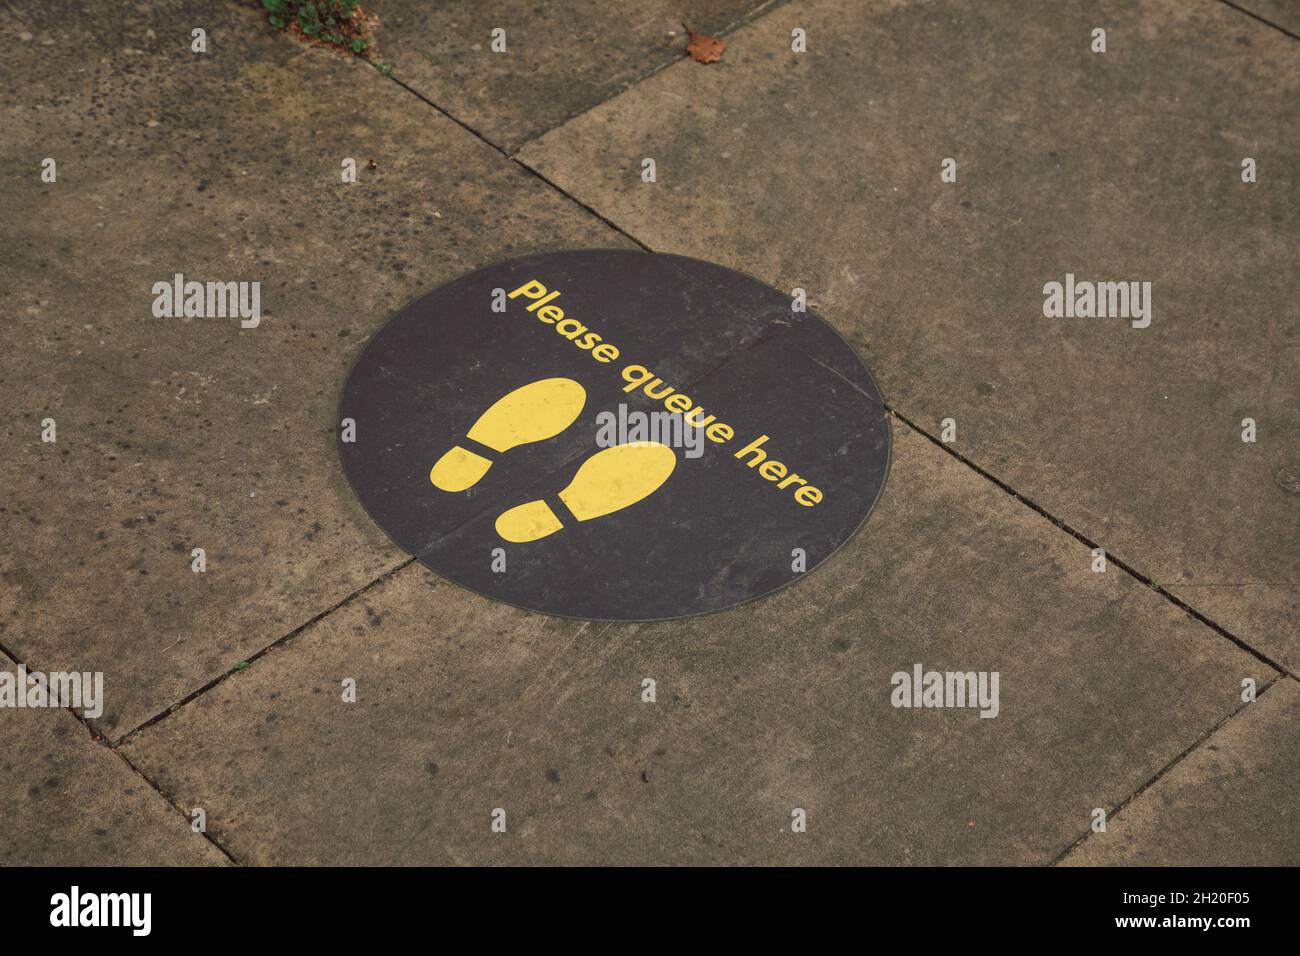 'Please queue here' 2-metre social distancing markers on the ground during Covid-19 pandemic Stock Photo